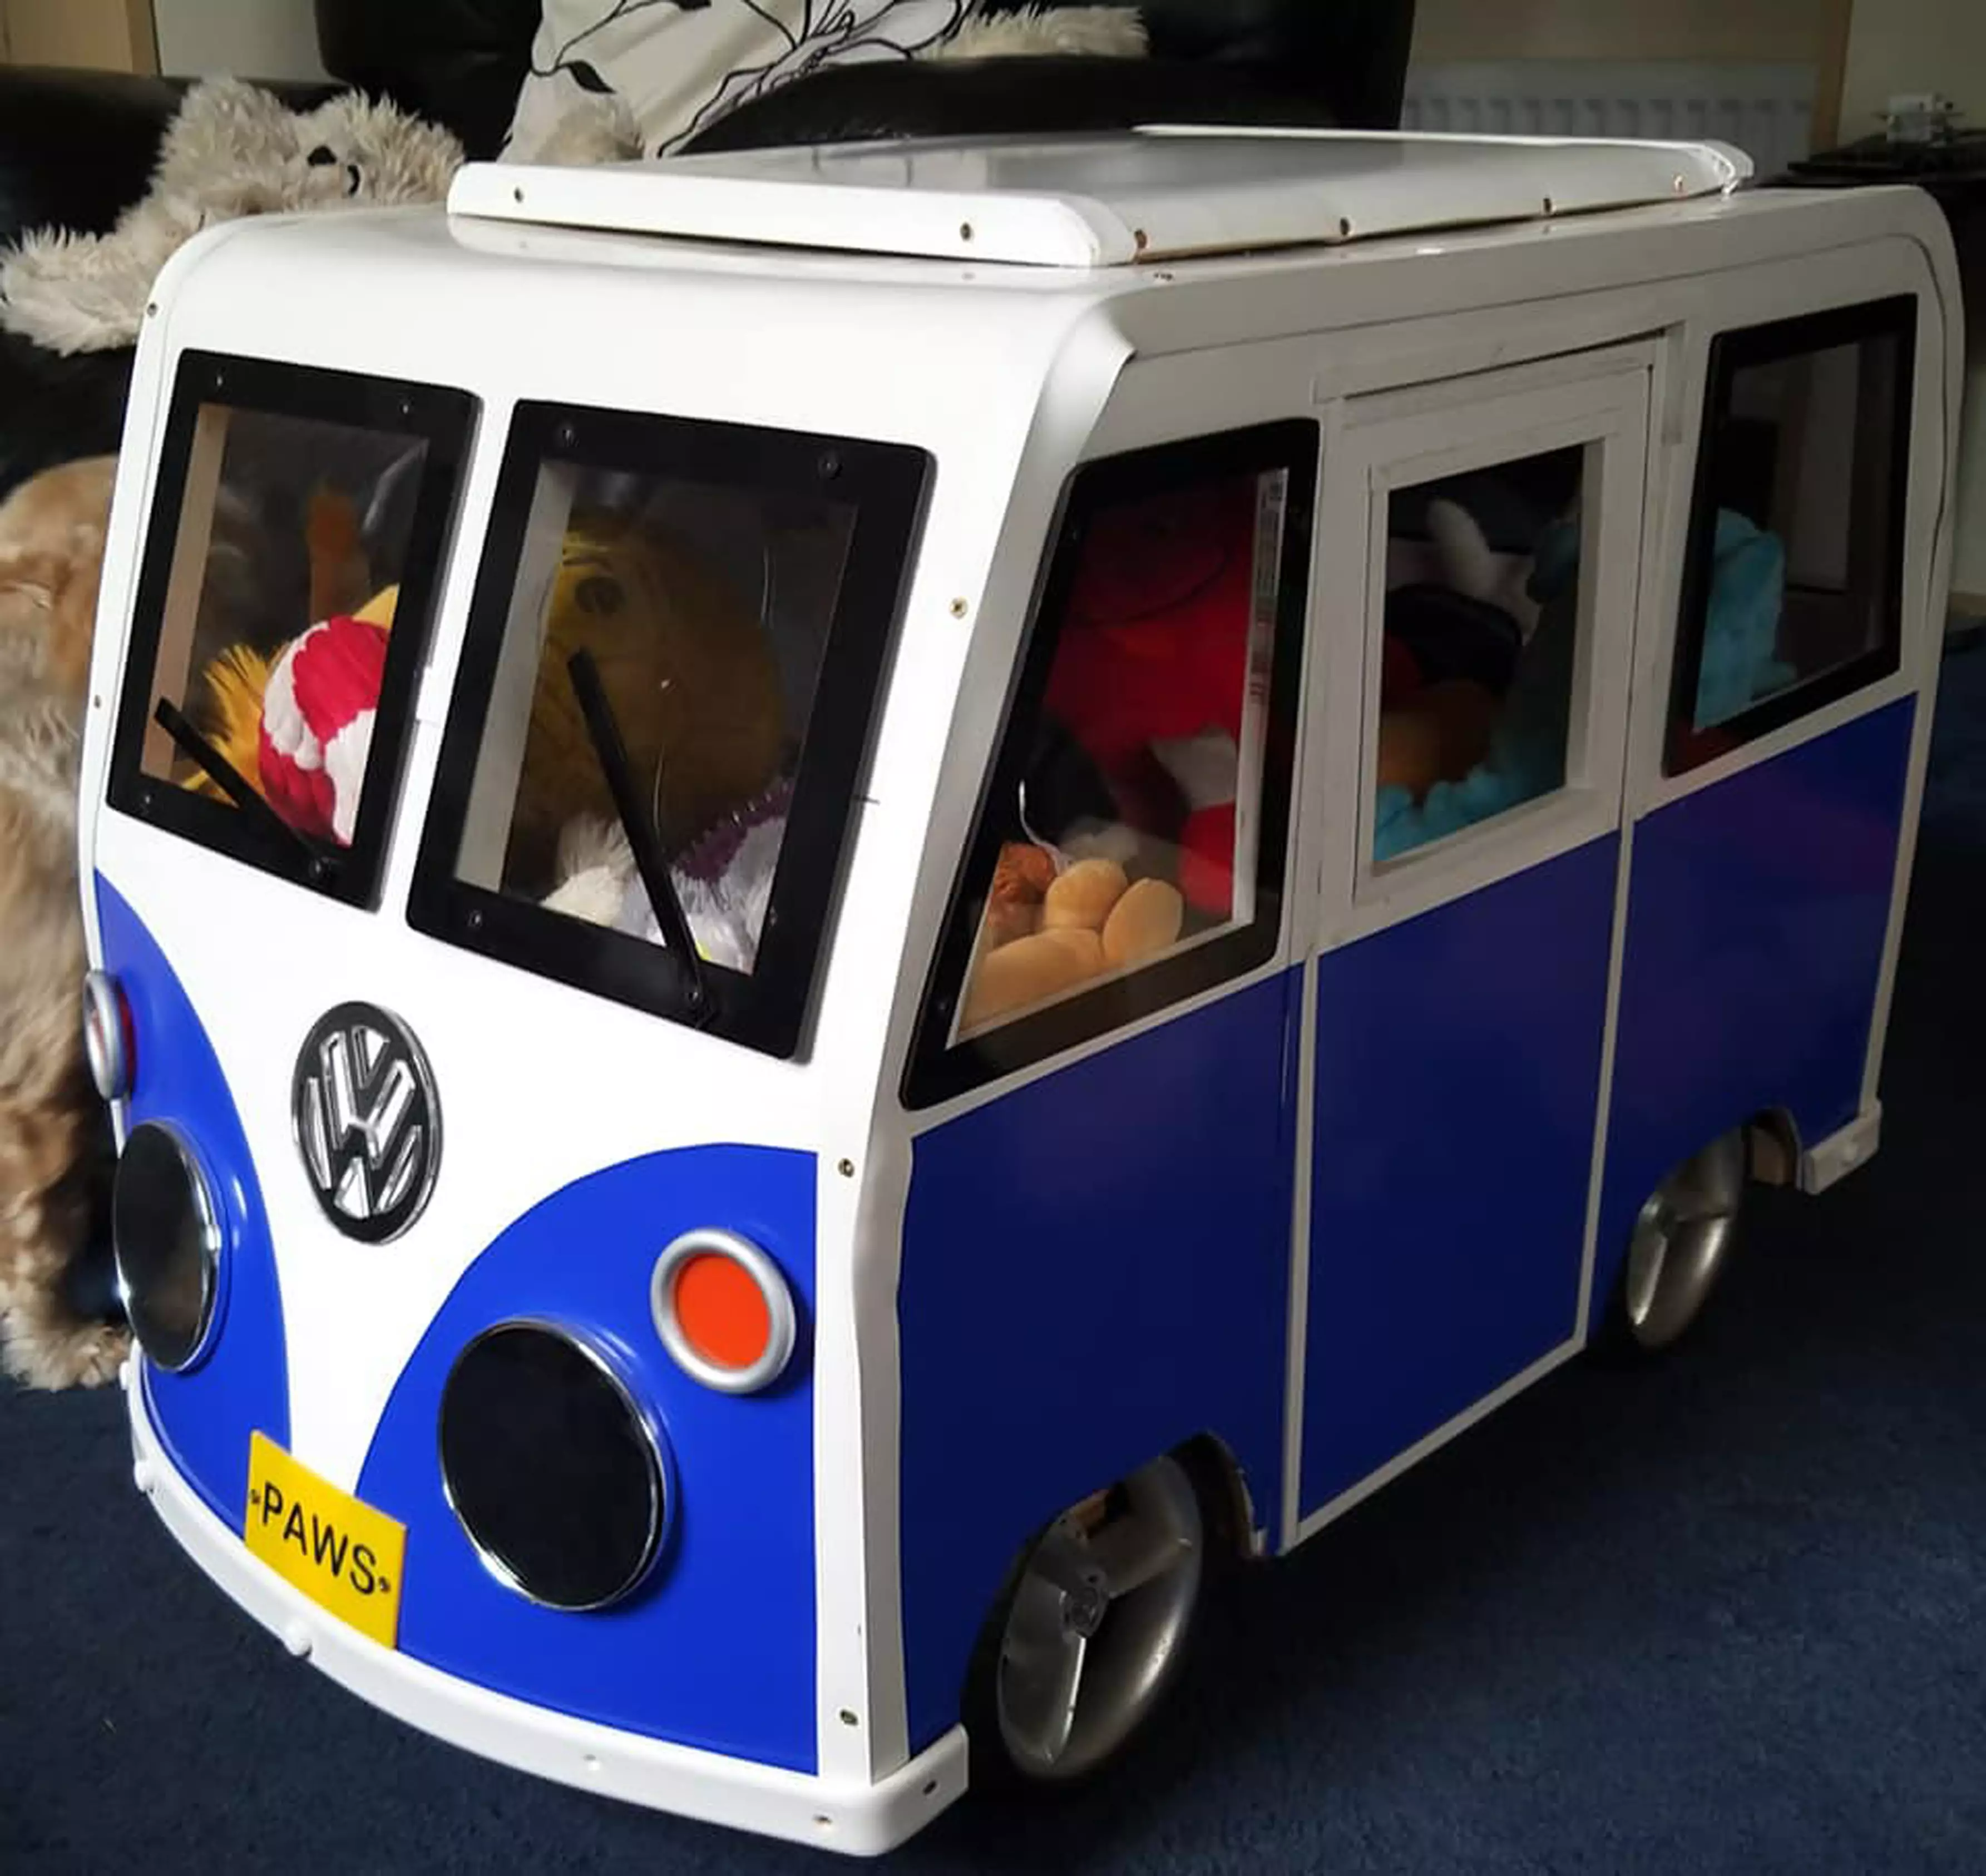 Who wouldn't want to travel in one of these? (